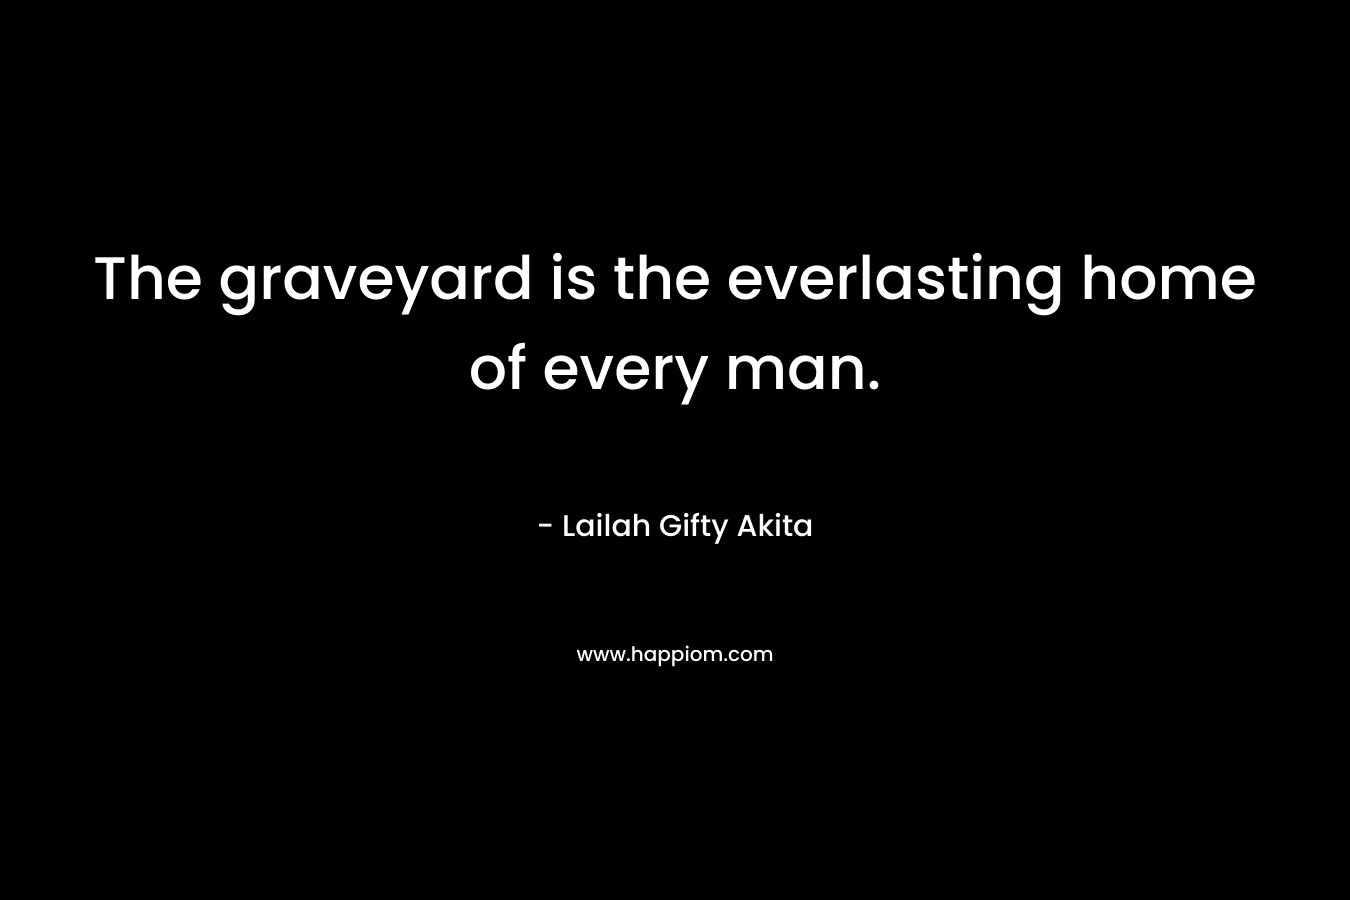 The graveyard is the everlasting home of every man. – Lailah Gifty Akita